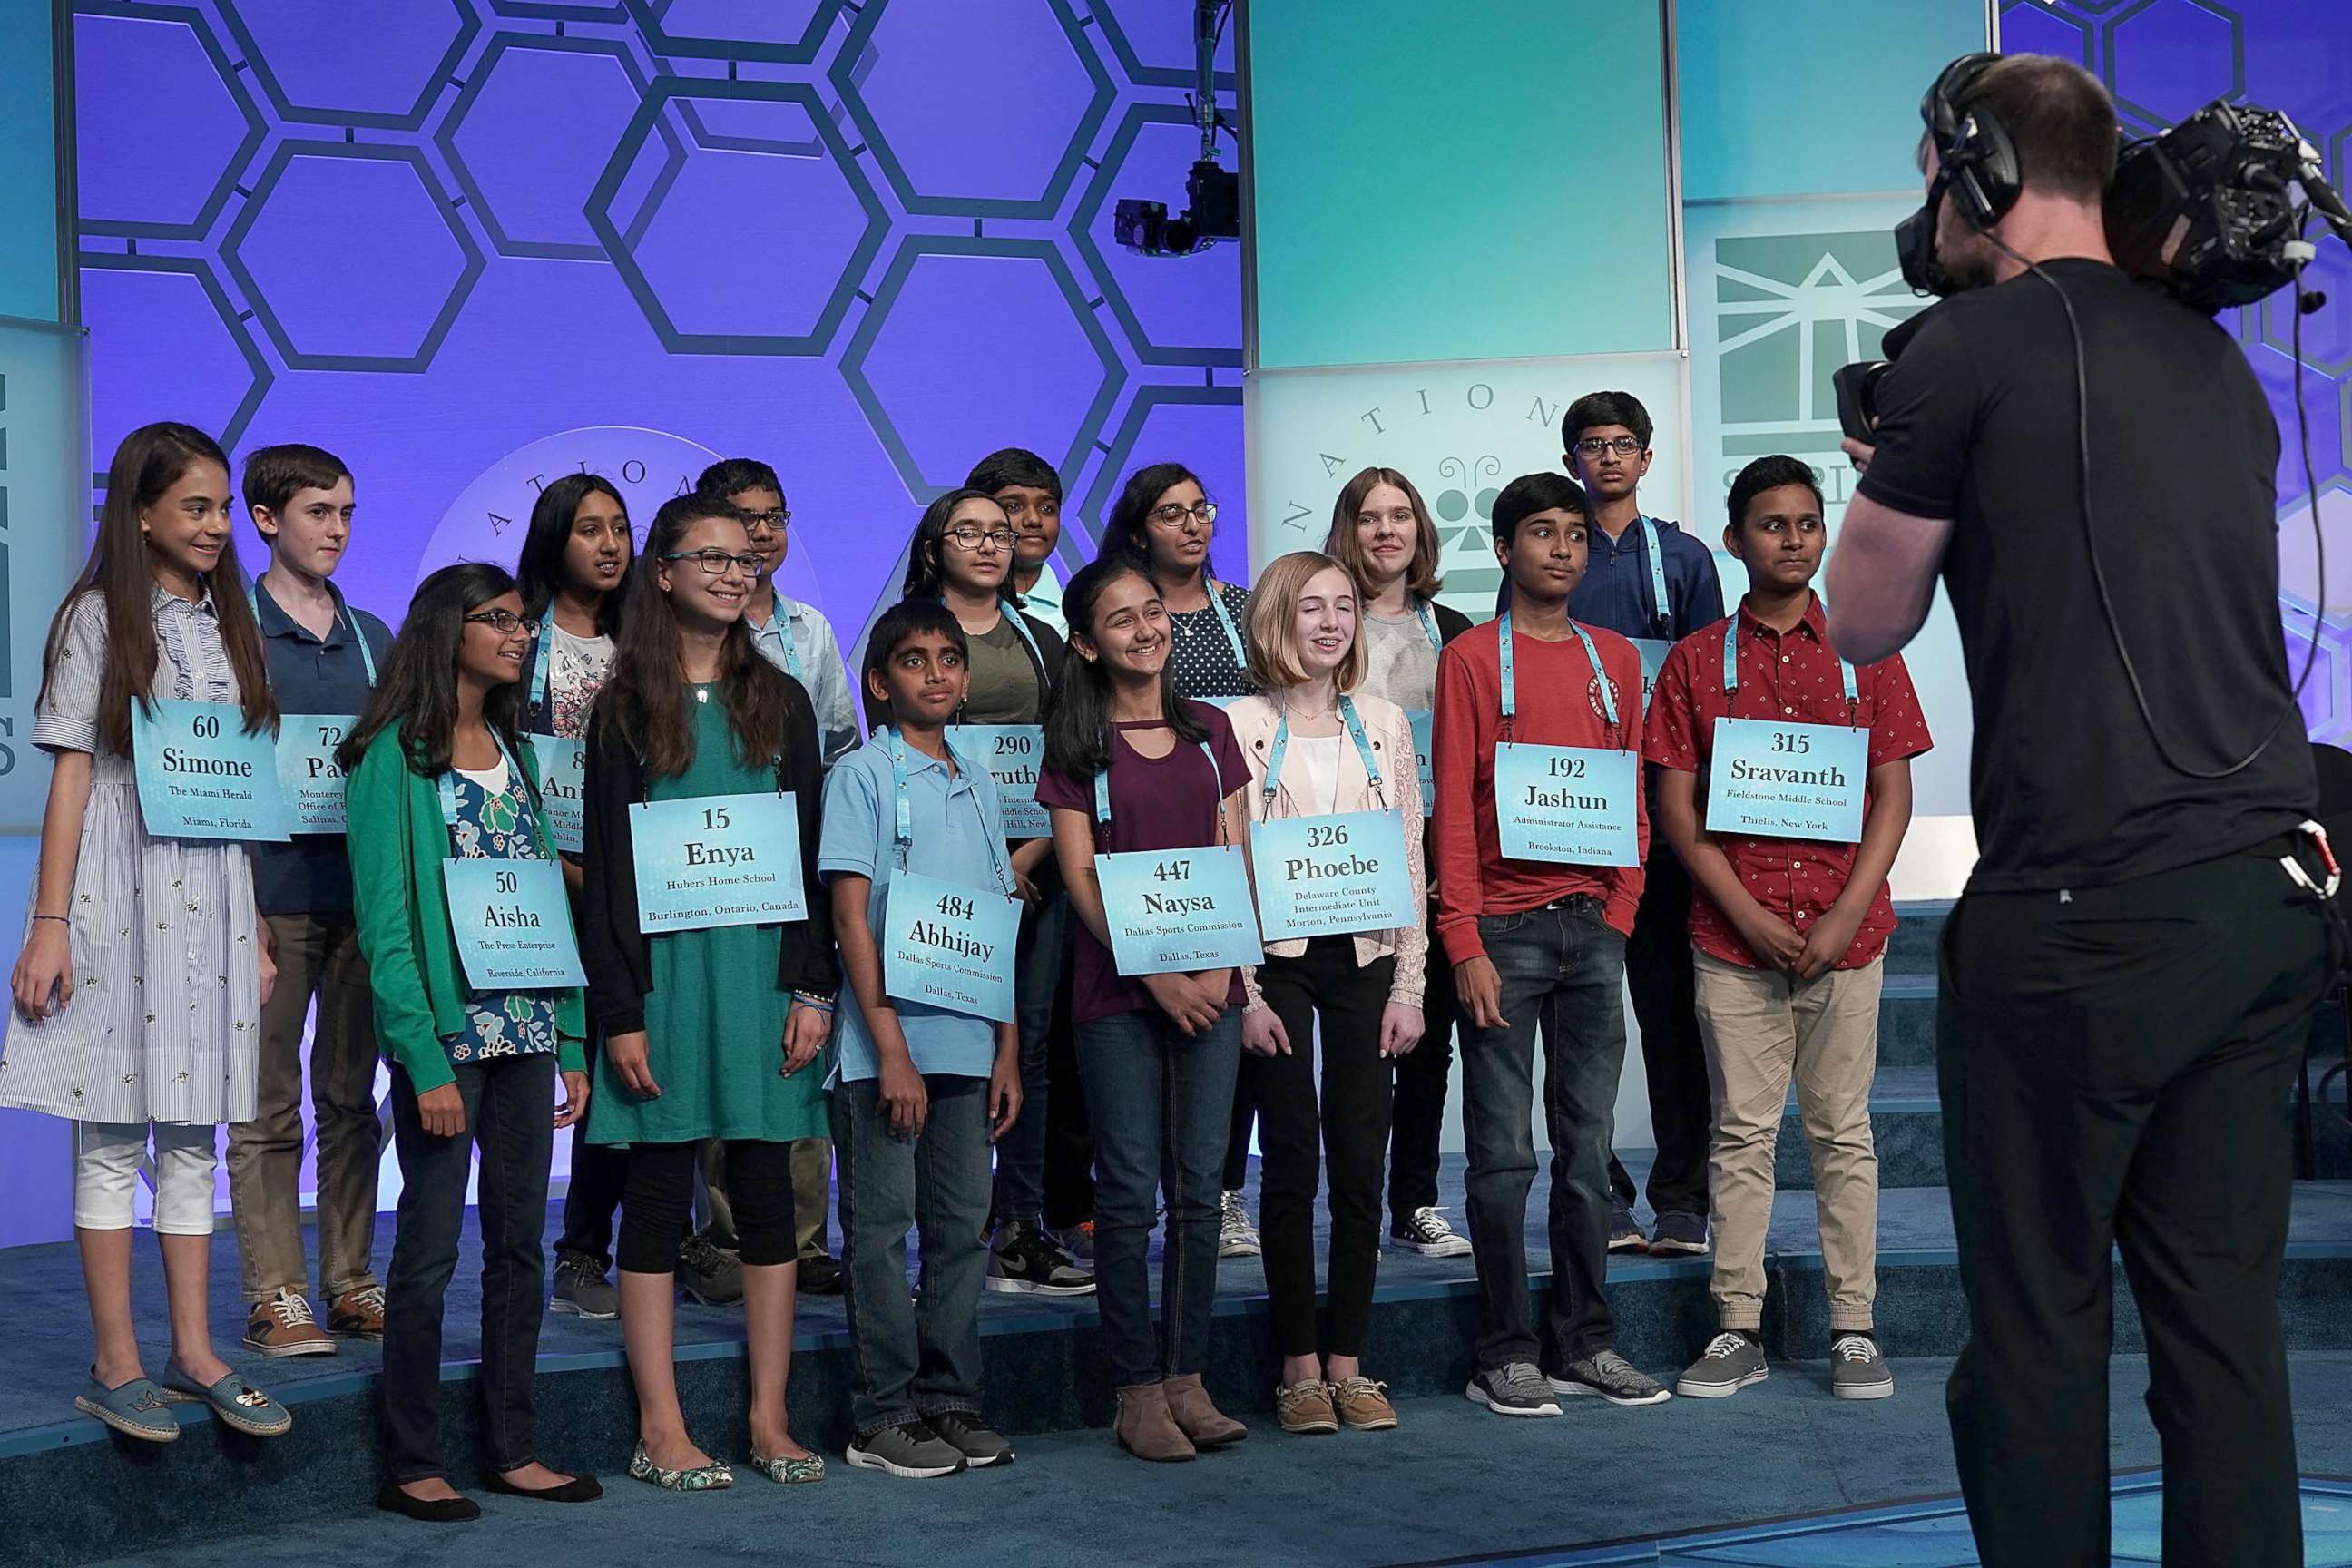 PHOTO: Spellers who have advanced to the evening round pose for a group picture after round eight of the 91st Scripps National Spelling Bee at the Gaylord National Resort and Convention Center May 31, 2018 in National Harbor, Maryland.